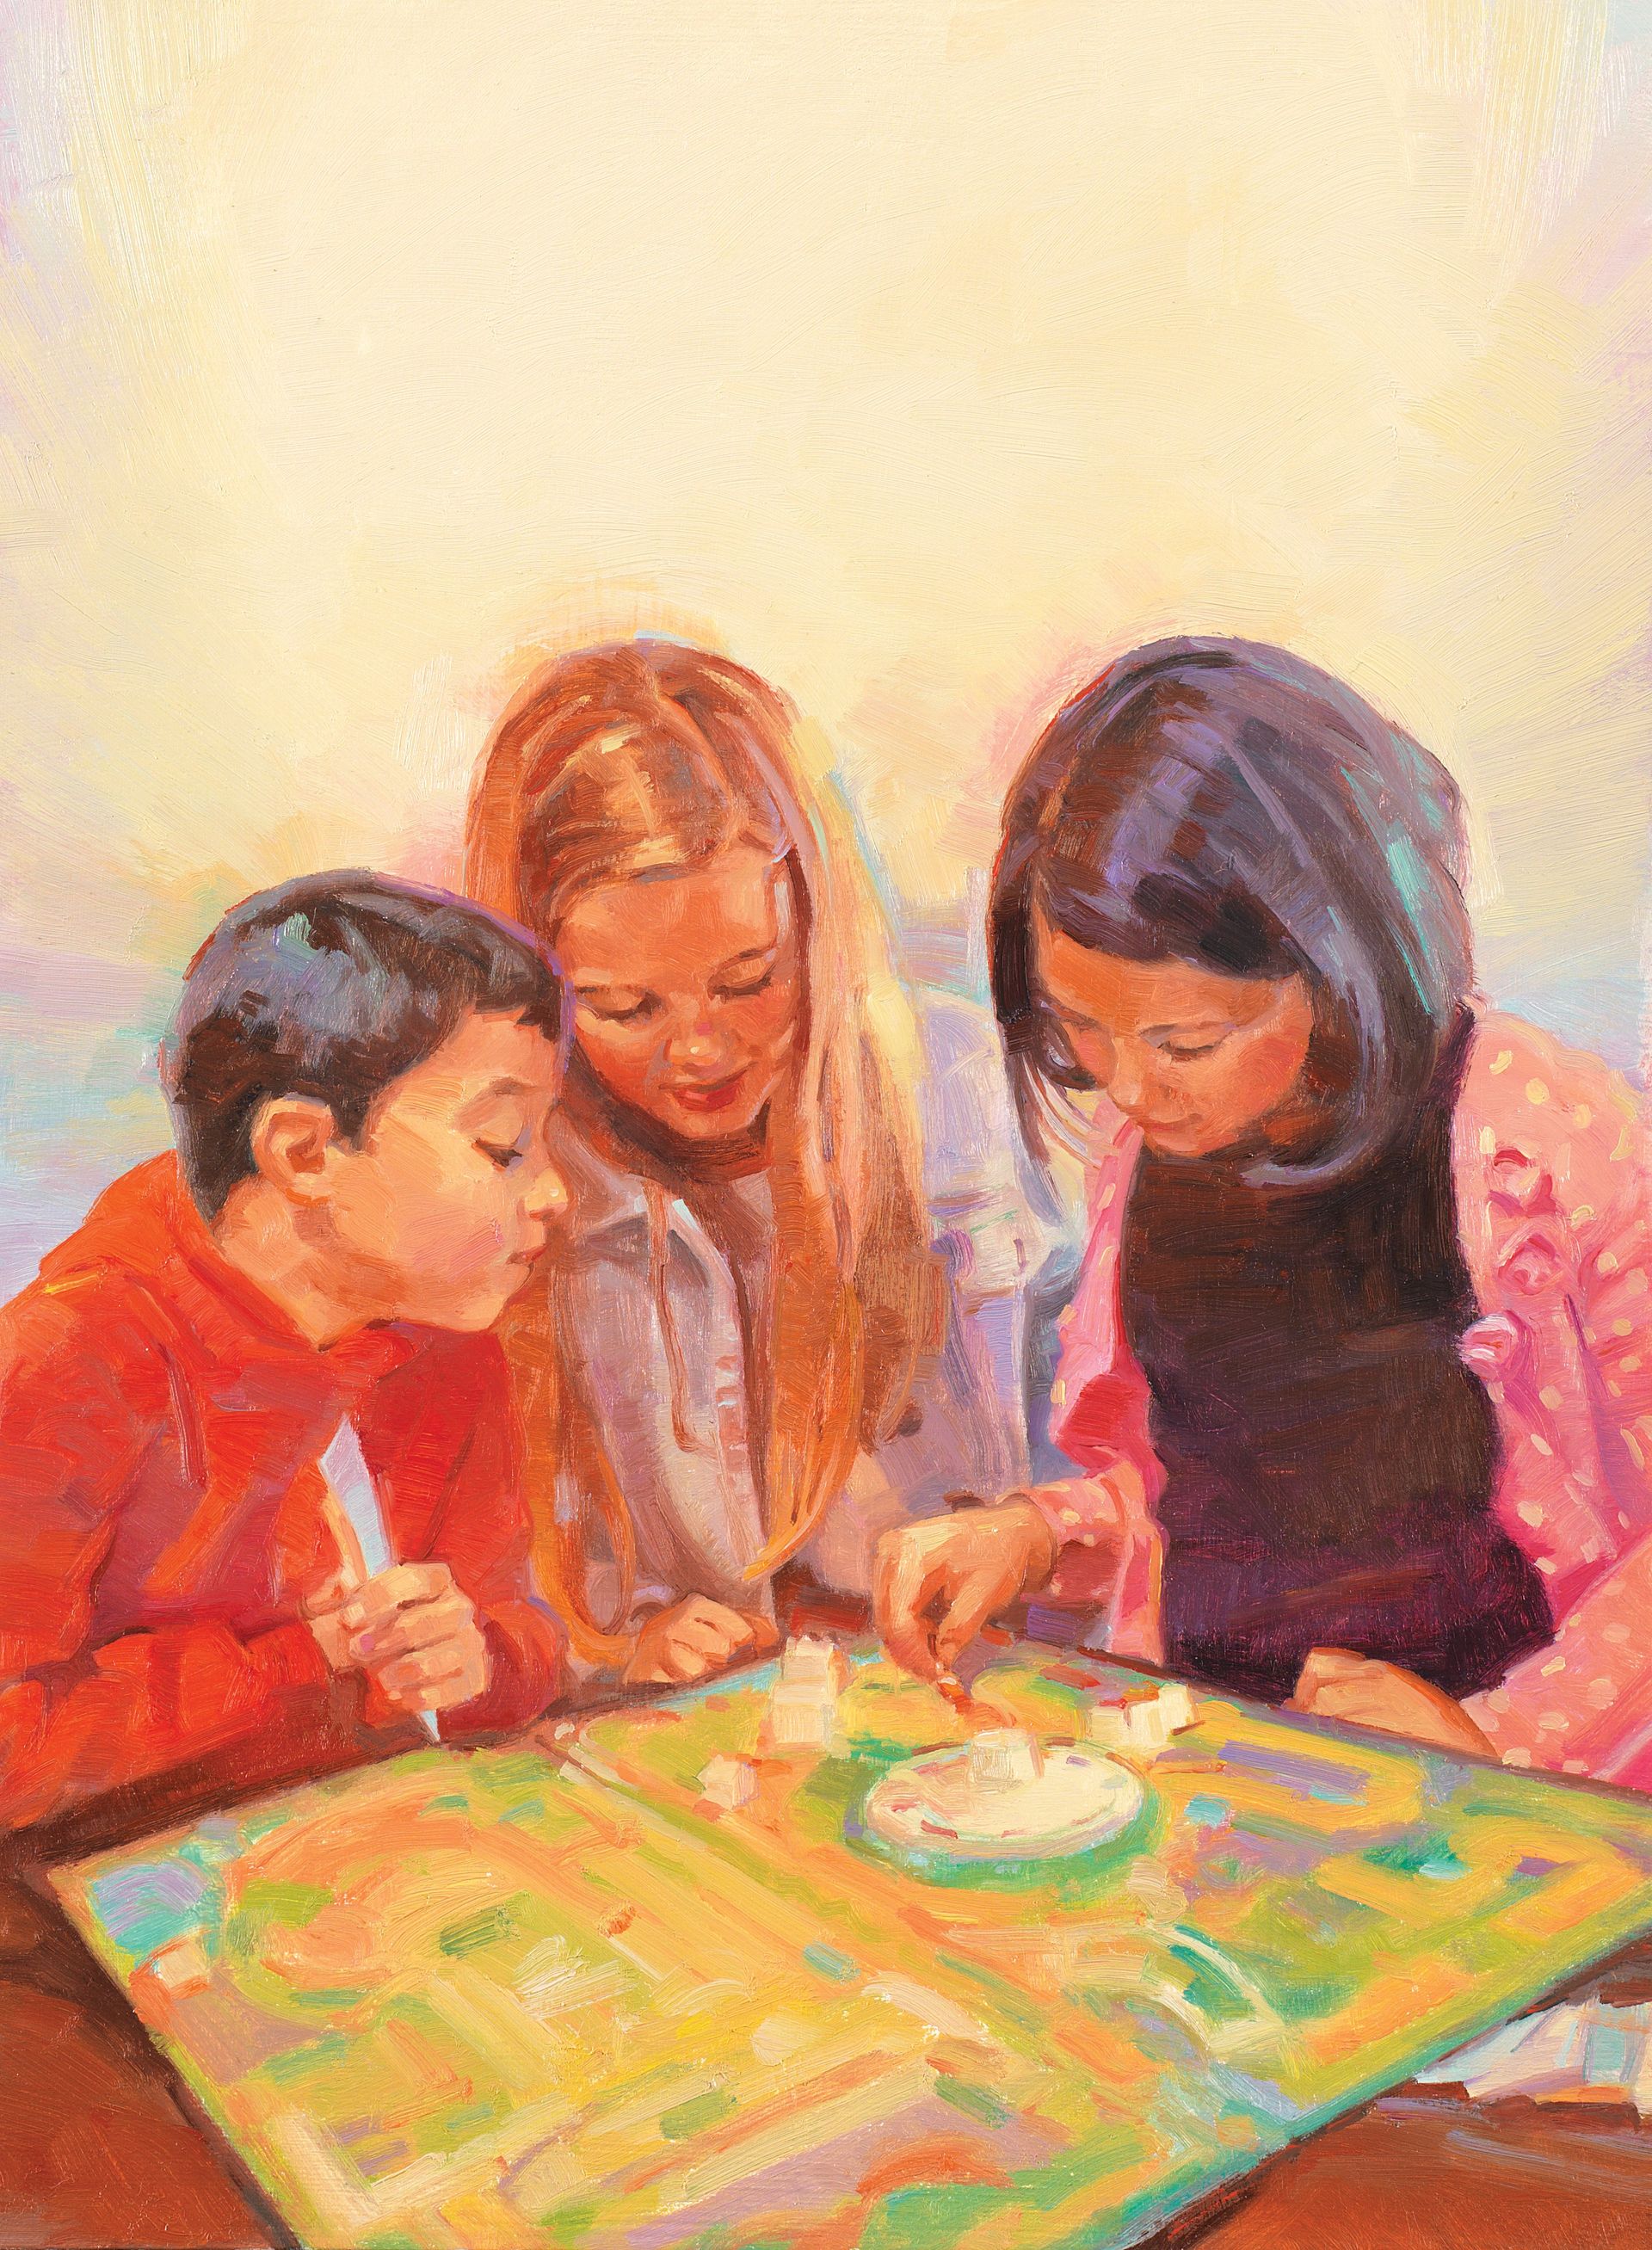 Two sisters and a brother play a board game together.